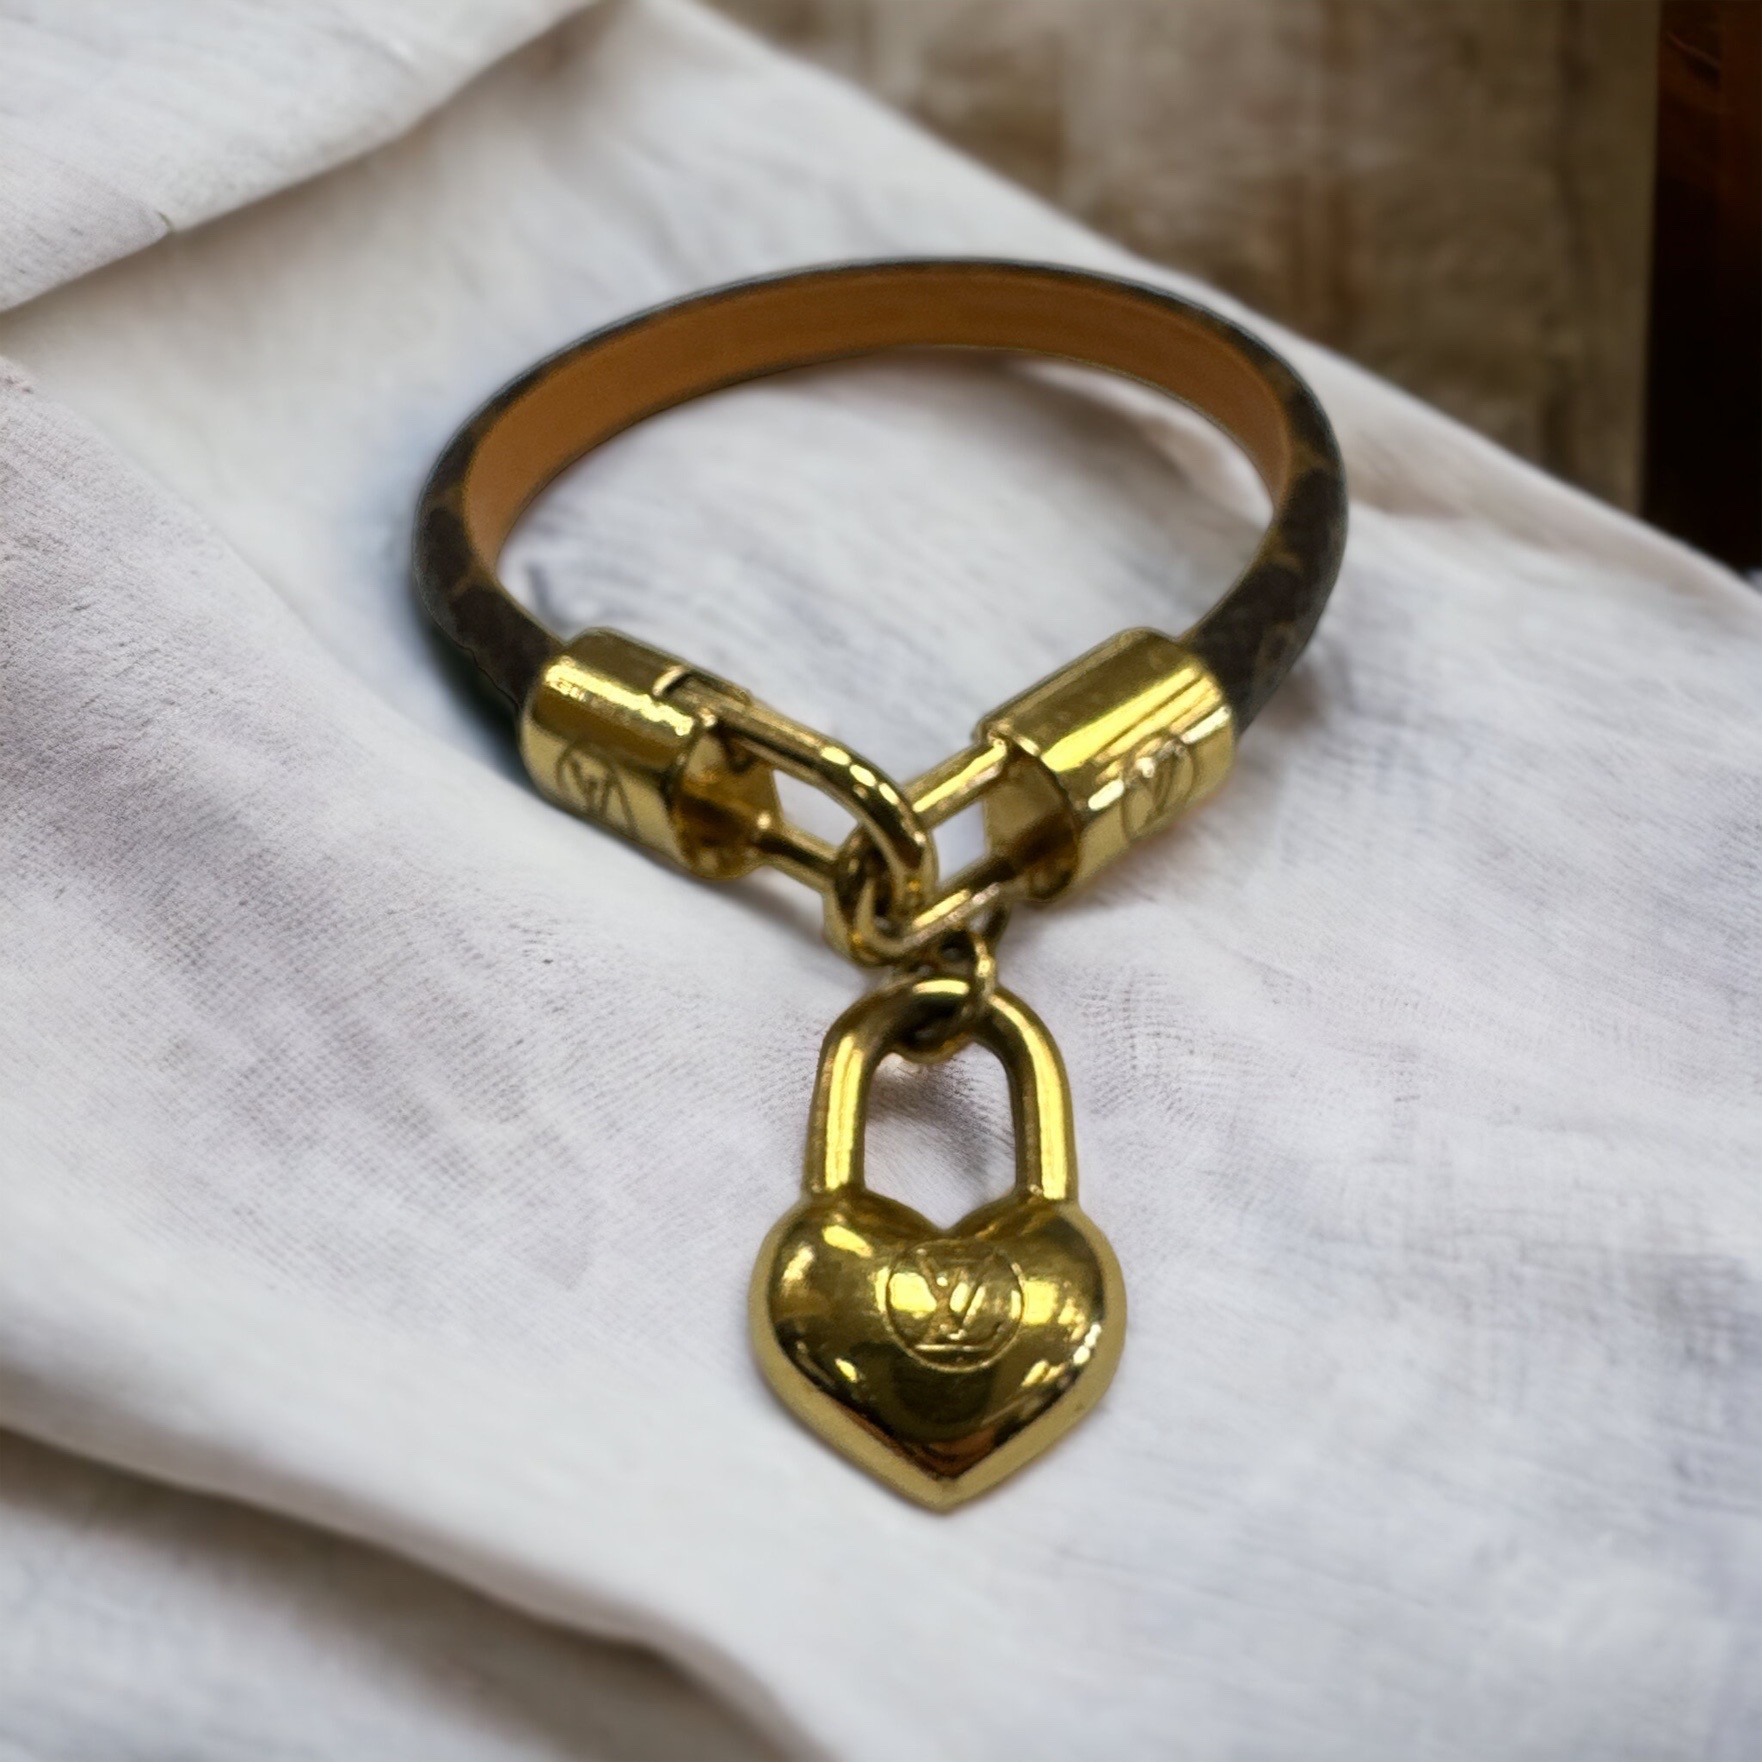 Products By Louis Vuitton: Crazy In Lock Bracelet